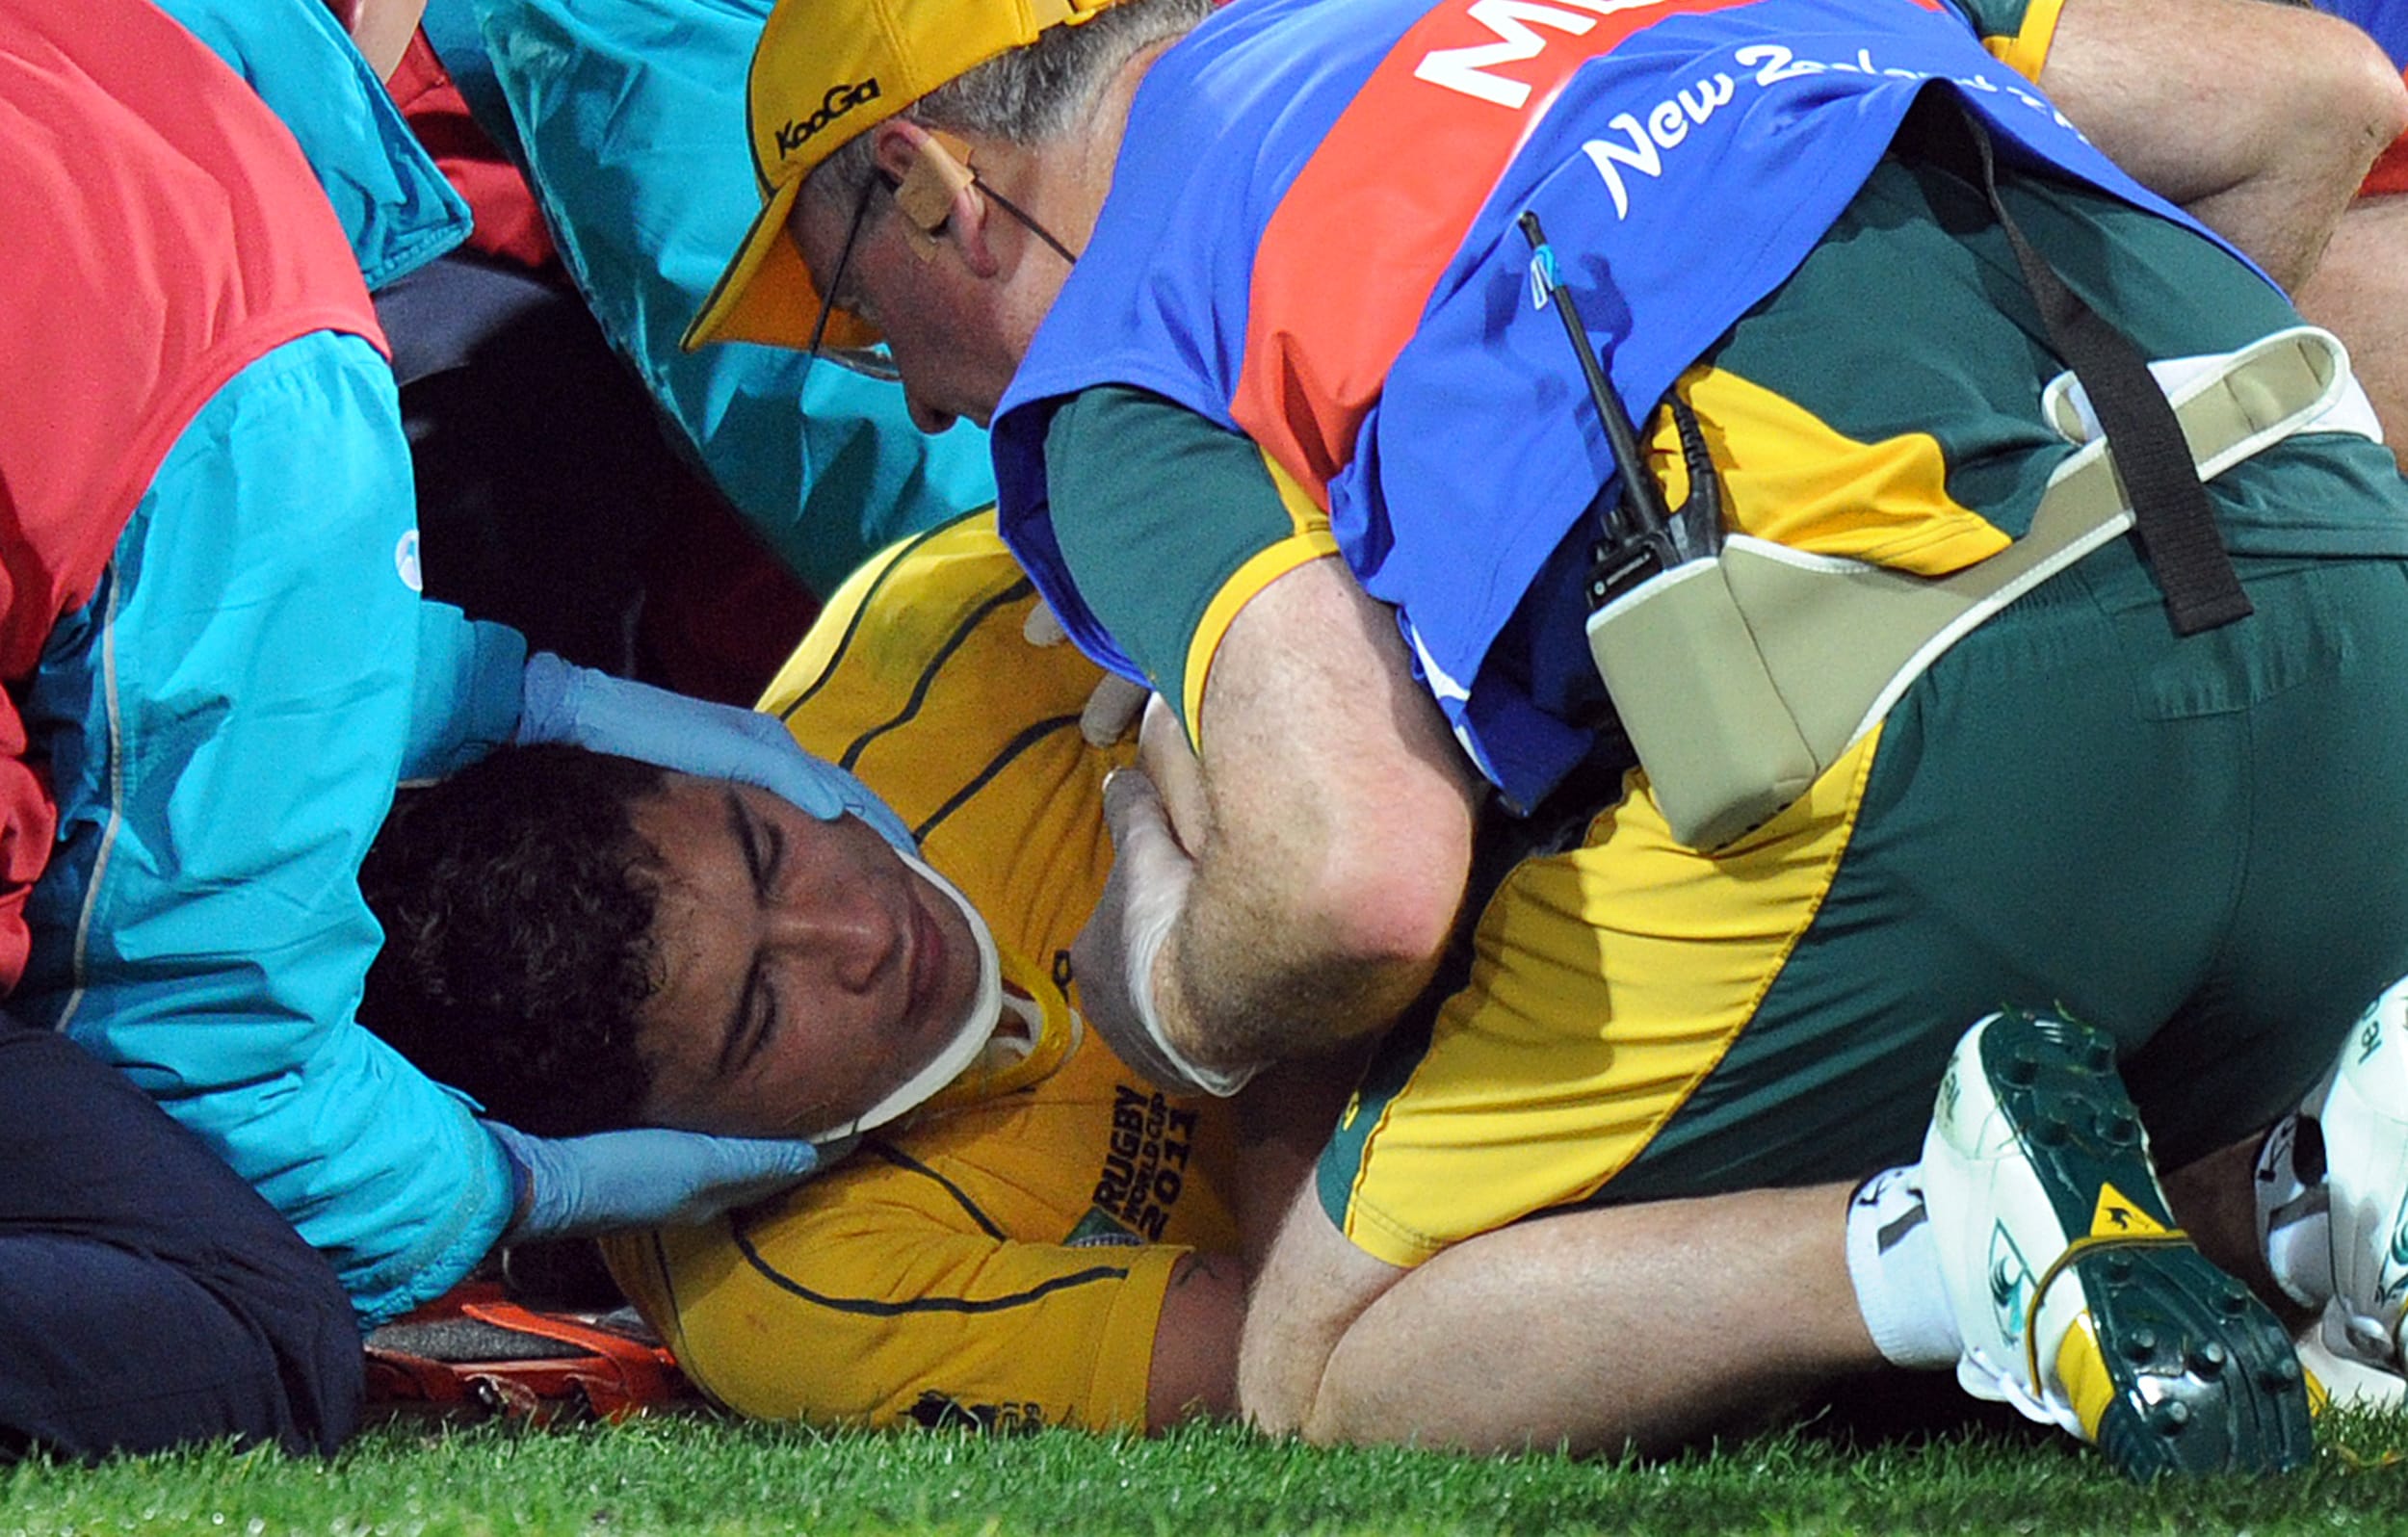 Wallabies player Anthony Faingaa is rolled onto a stretcher after receiving an accidental knee to the head during the 2011 Rugby World Cup.